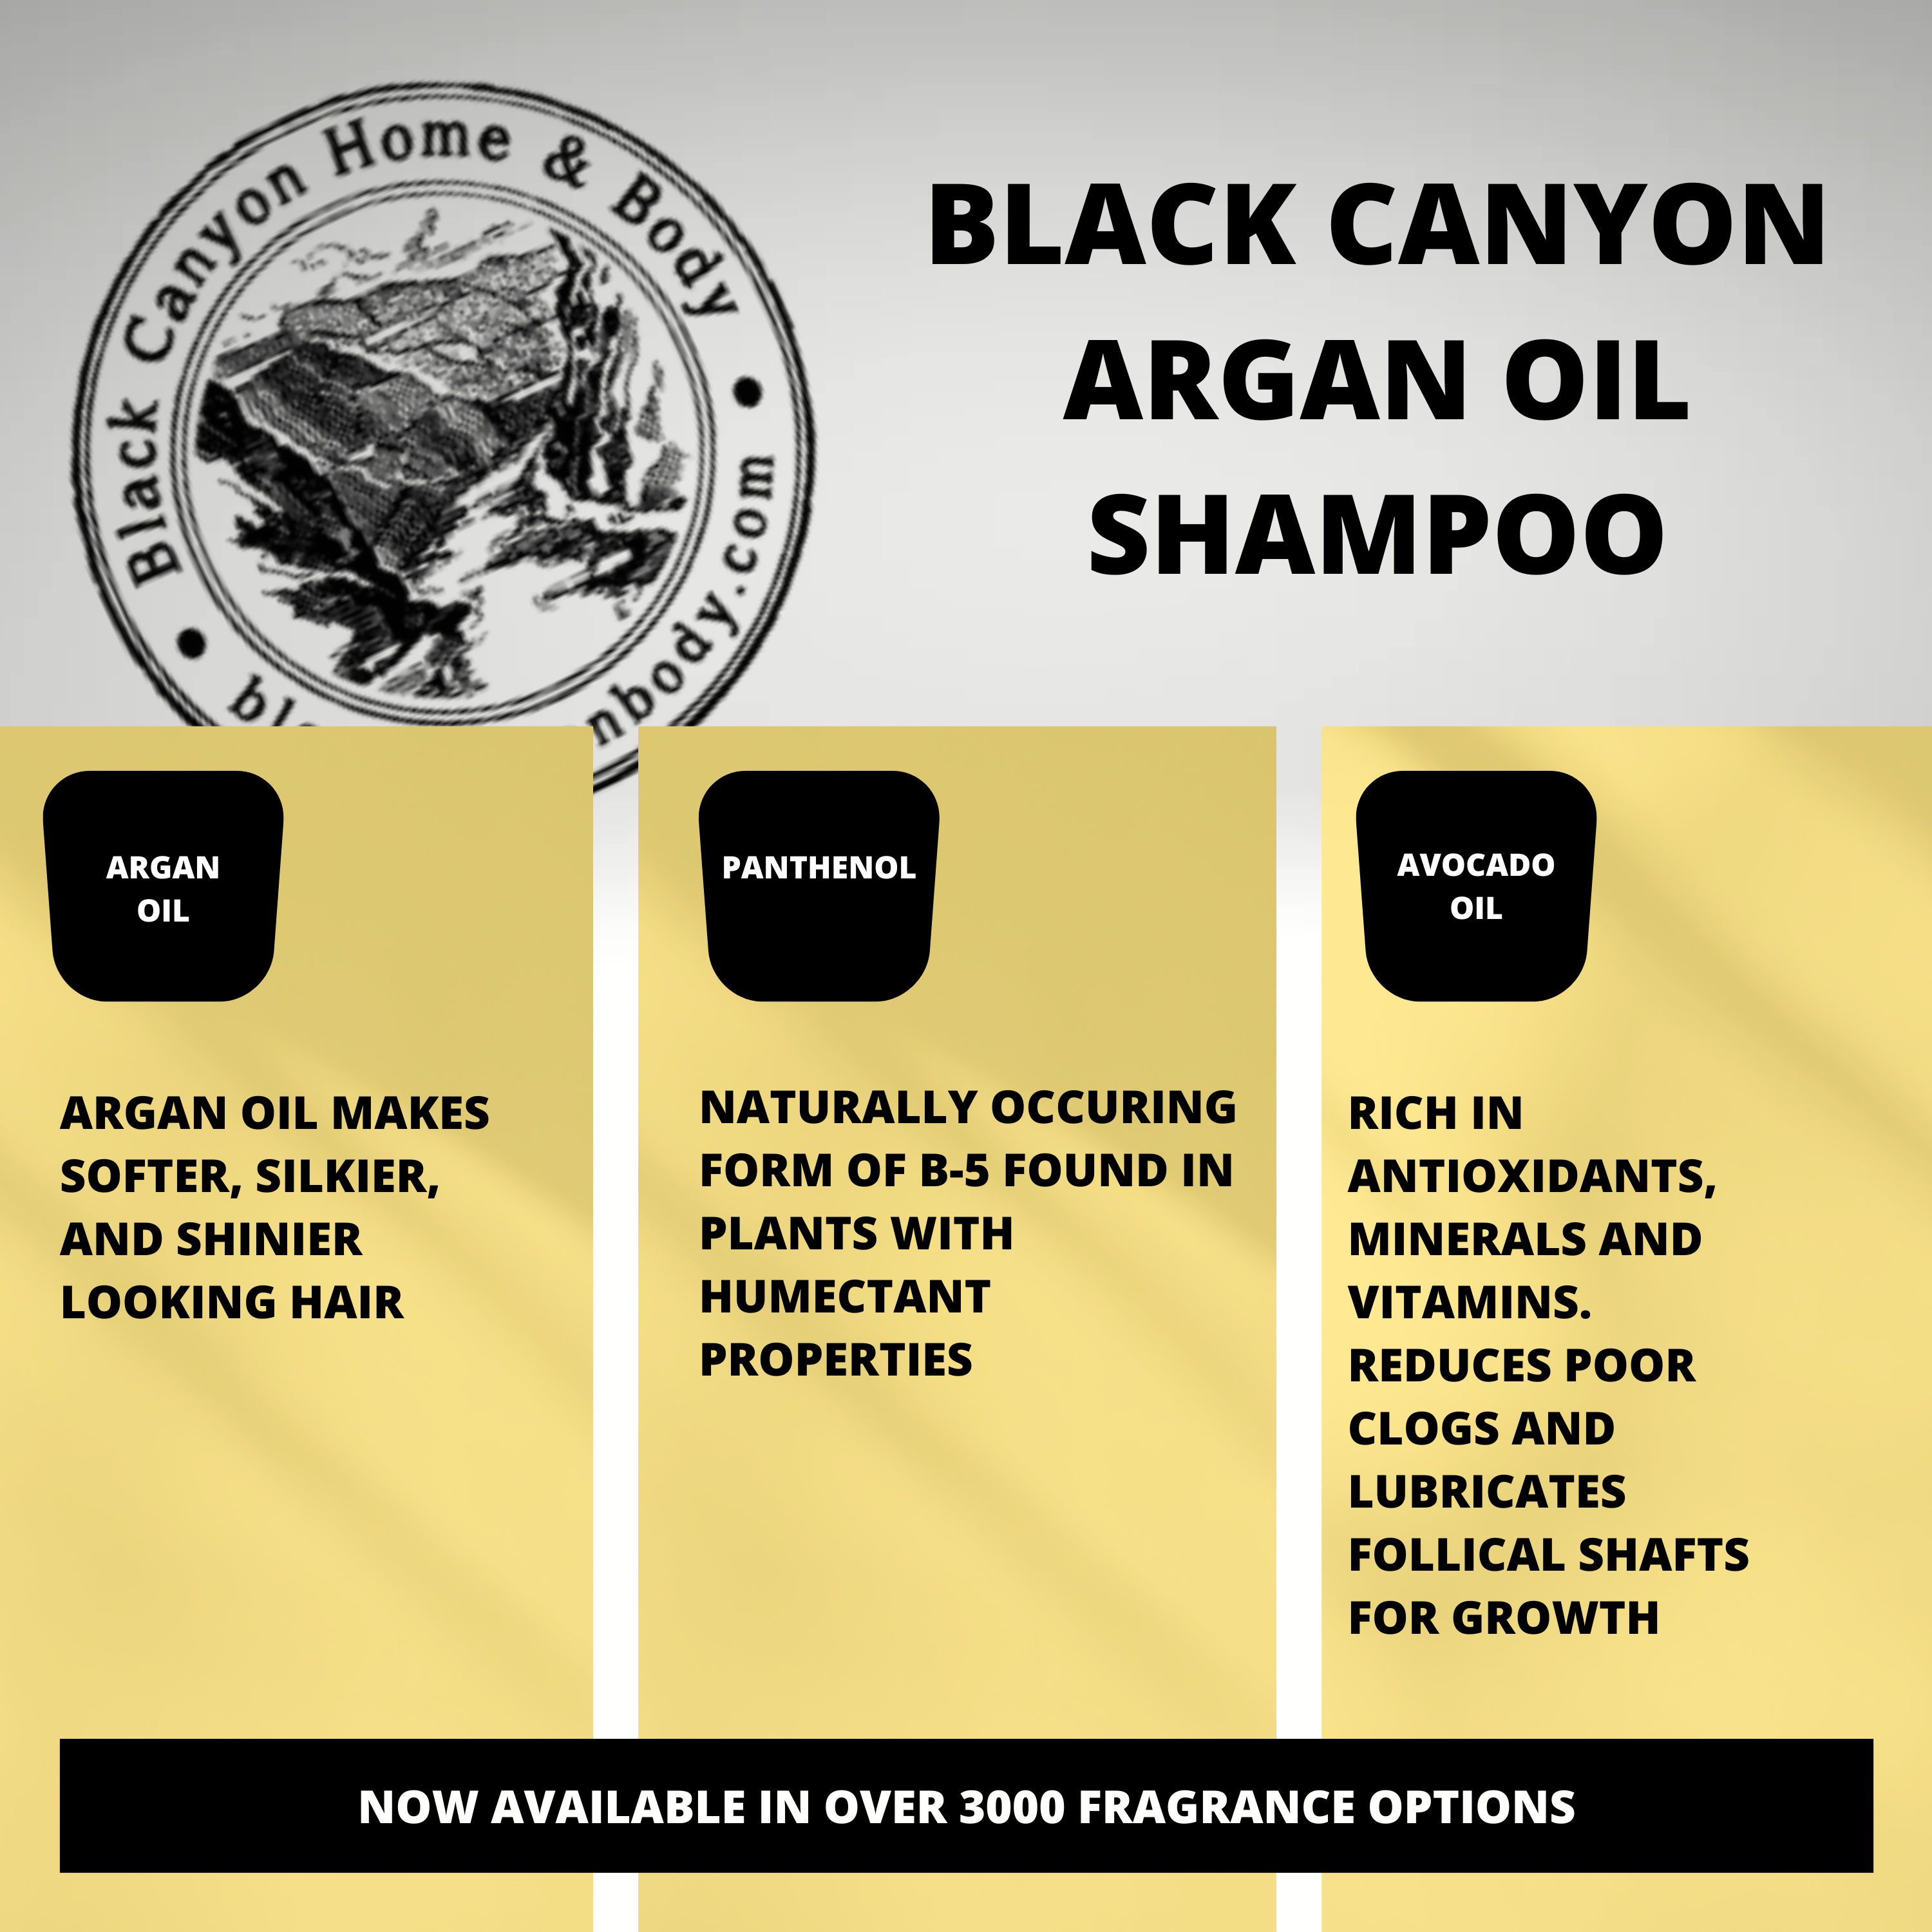 Black Canyon Amber Cherry & Sandalwood Scented Shampoo with Argan Oil